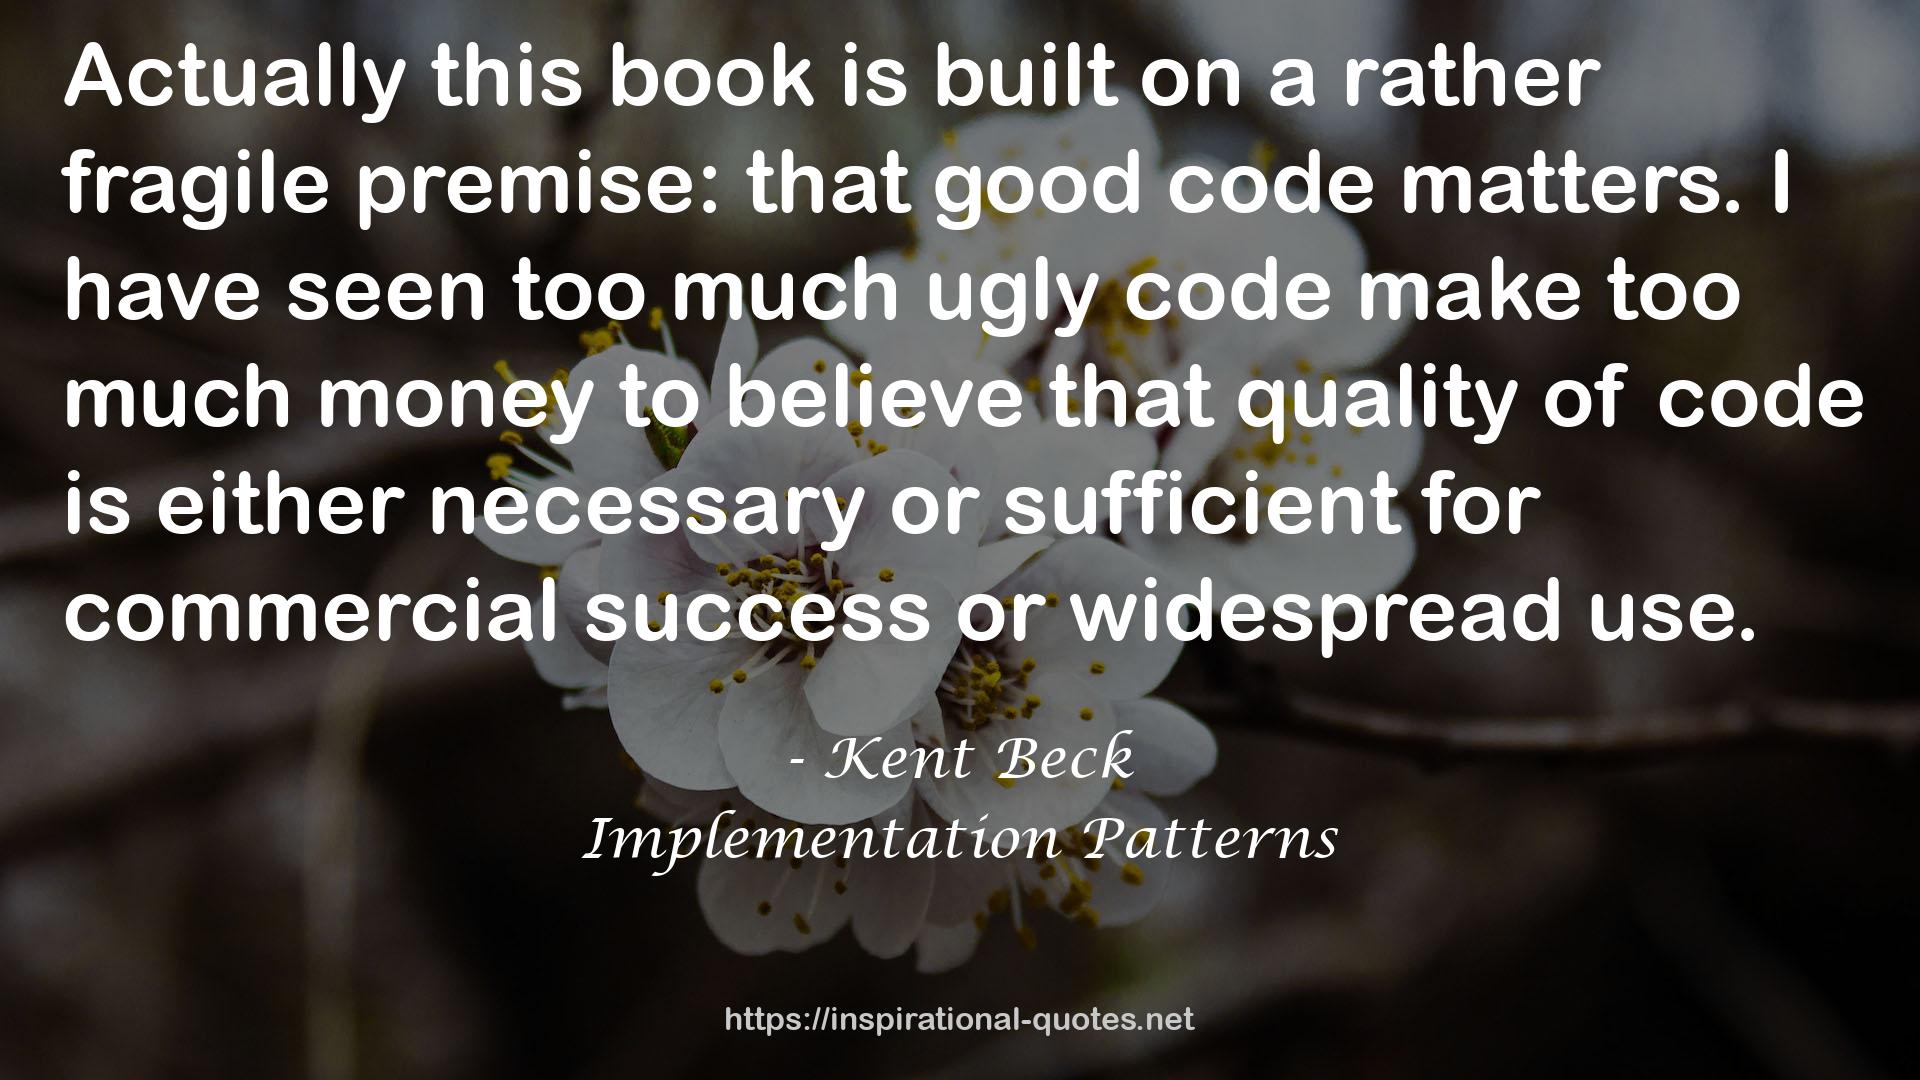 Implementation Patterns QUOTES